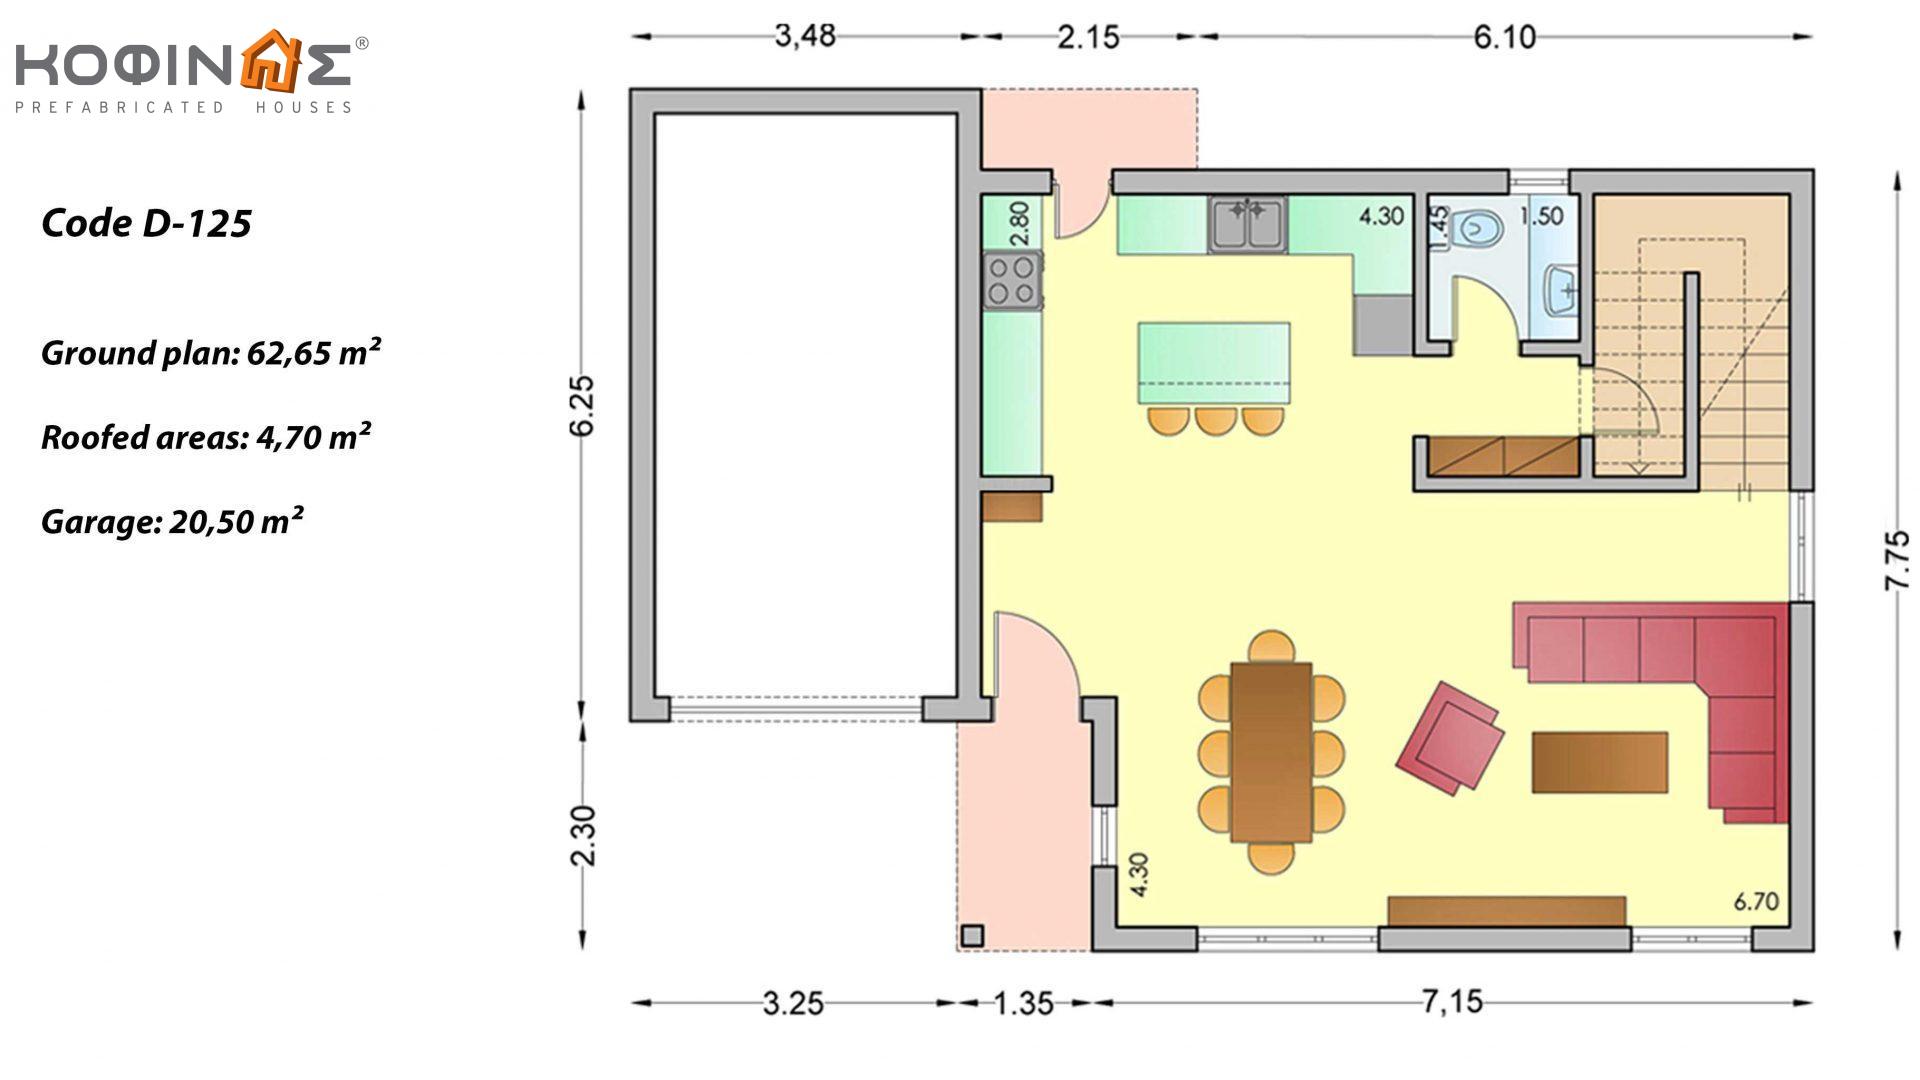 2-story house D-125, total surface of 125.30 m², +Garage 20.50 m²(=145.80 m²),covered roofed areas 4.70 m²,balconies 20.50 m²